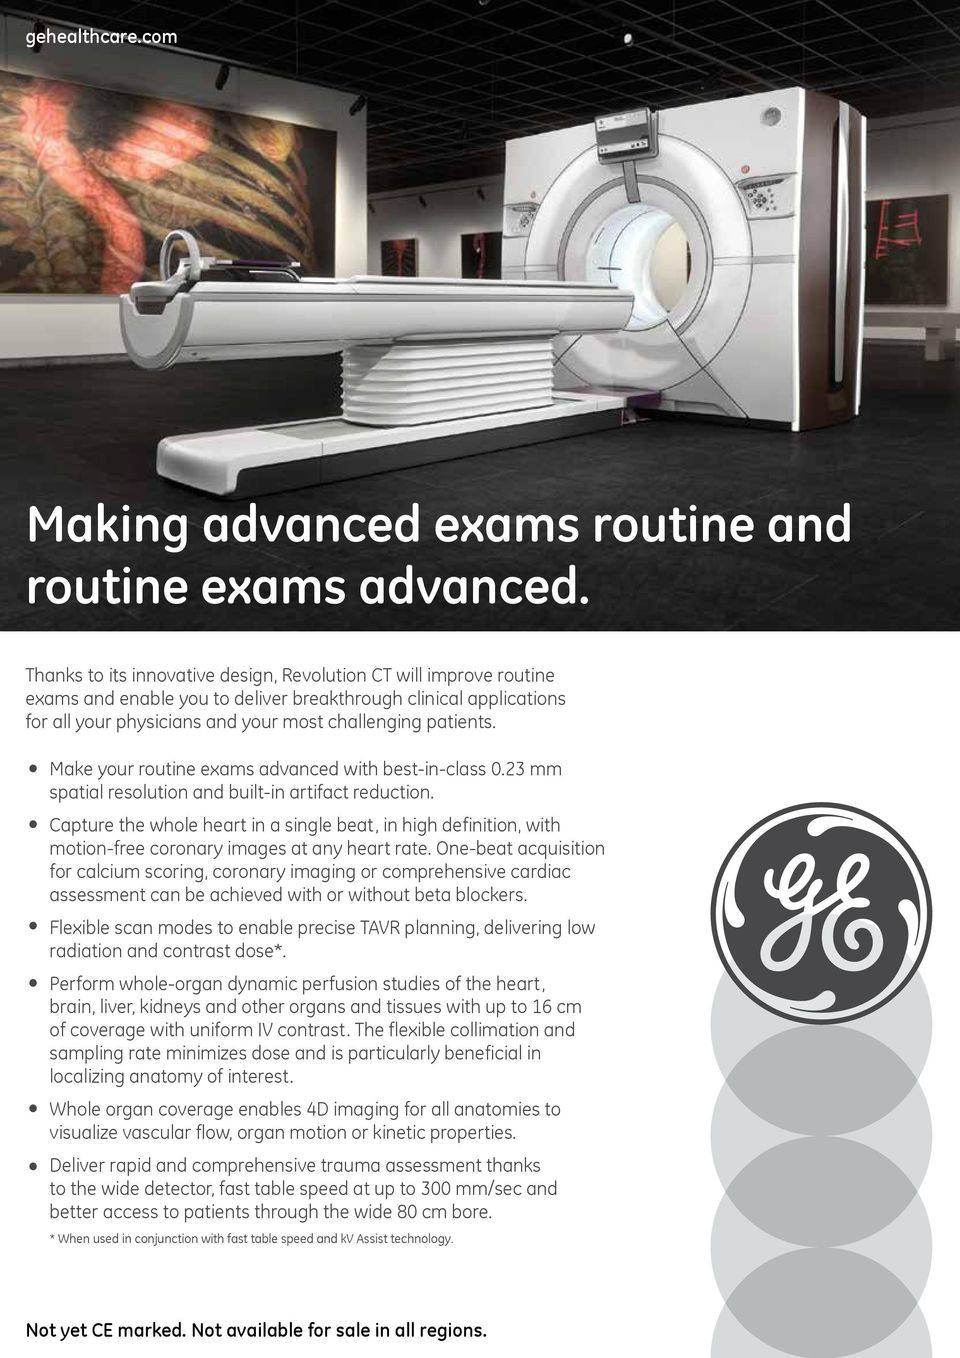 ...... Make your routine exams advanced with best-in-class 0.23 mm spatial resolution and built-in artifact reduction.